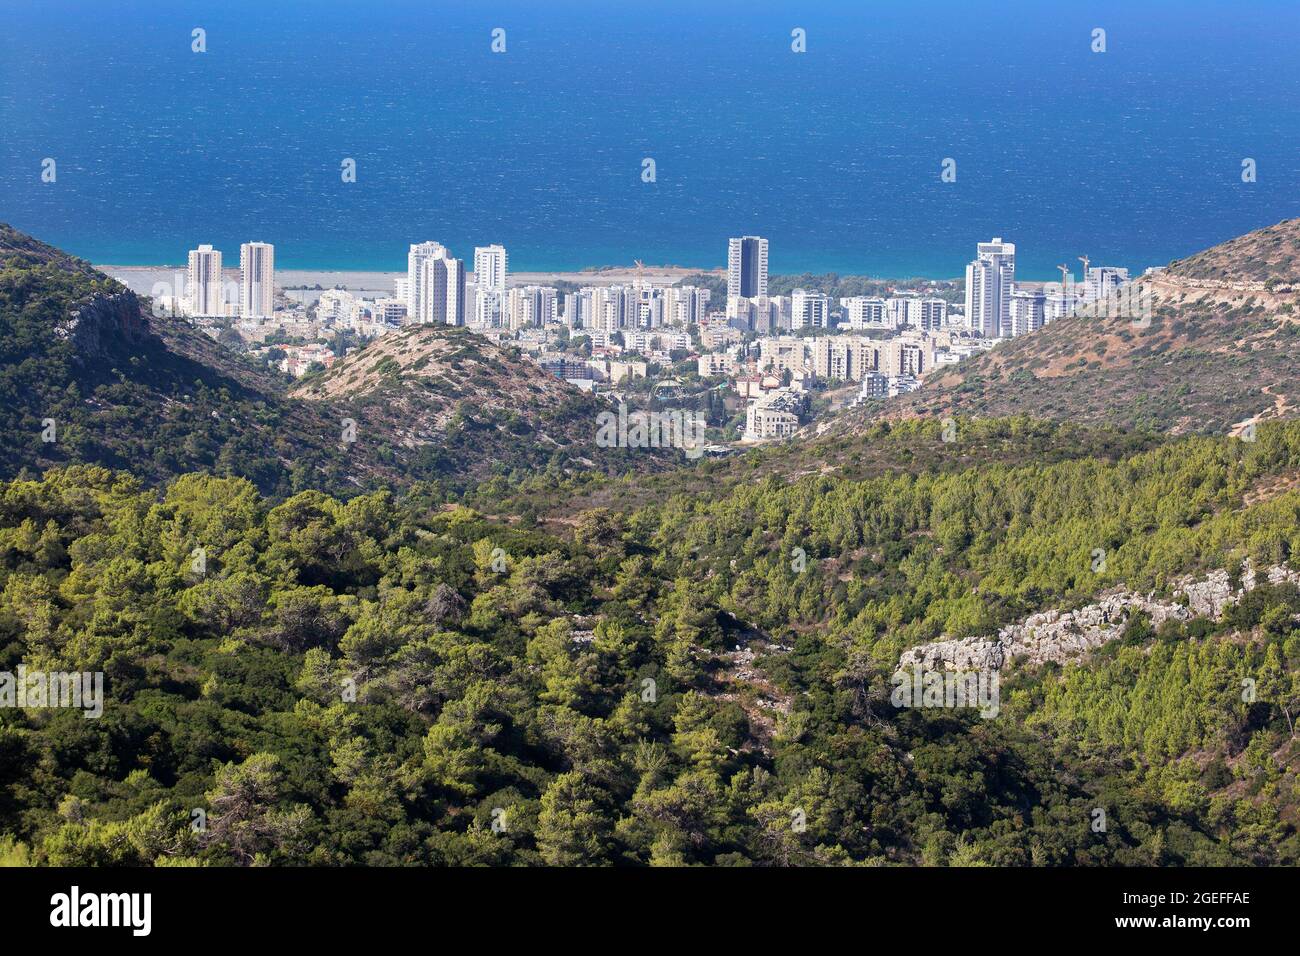 City of Haifa on the Mediterranean coast in Israel, view from the lower slopes of Mount Carmel Stock Photo